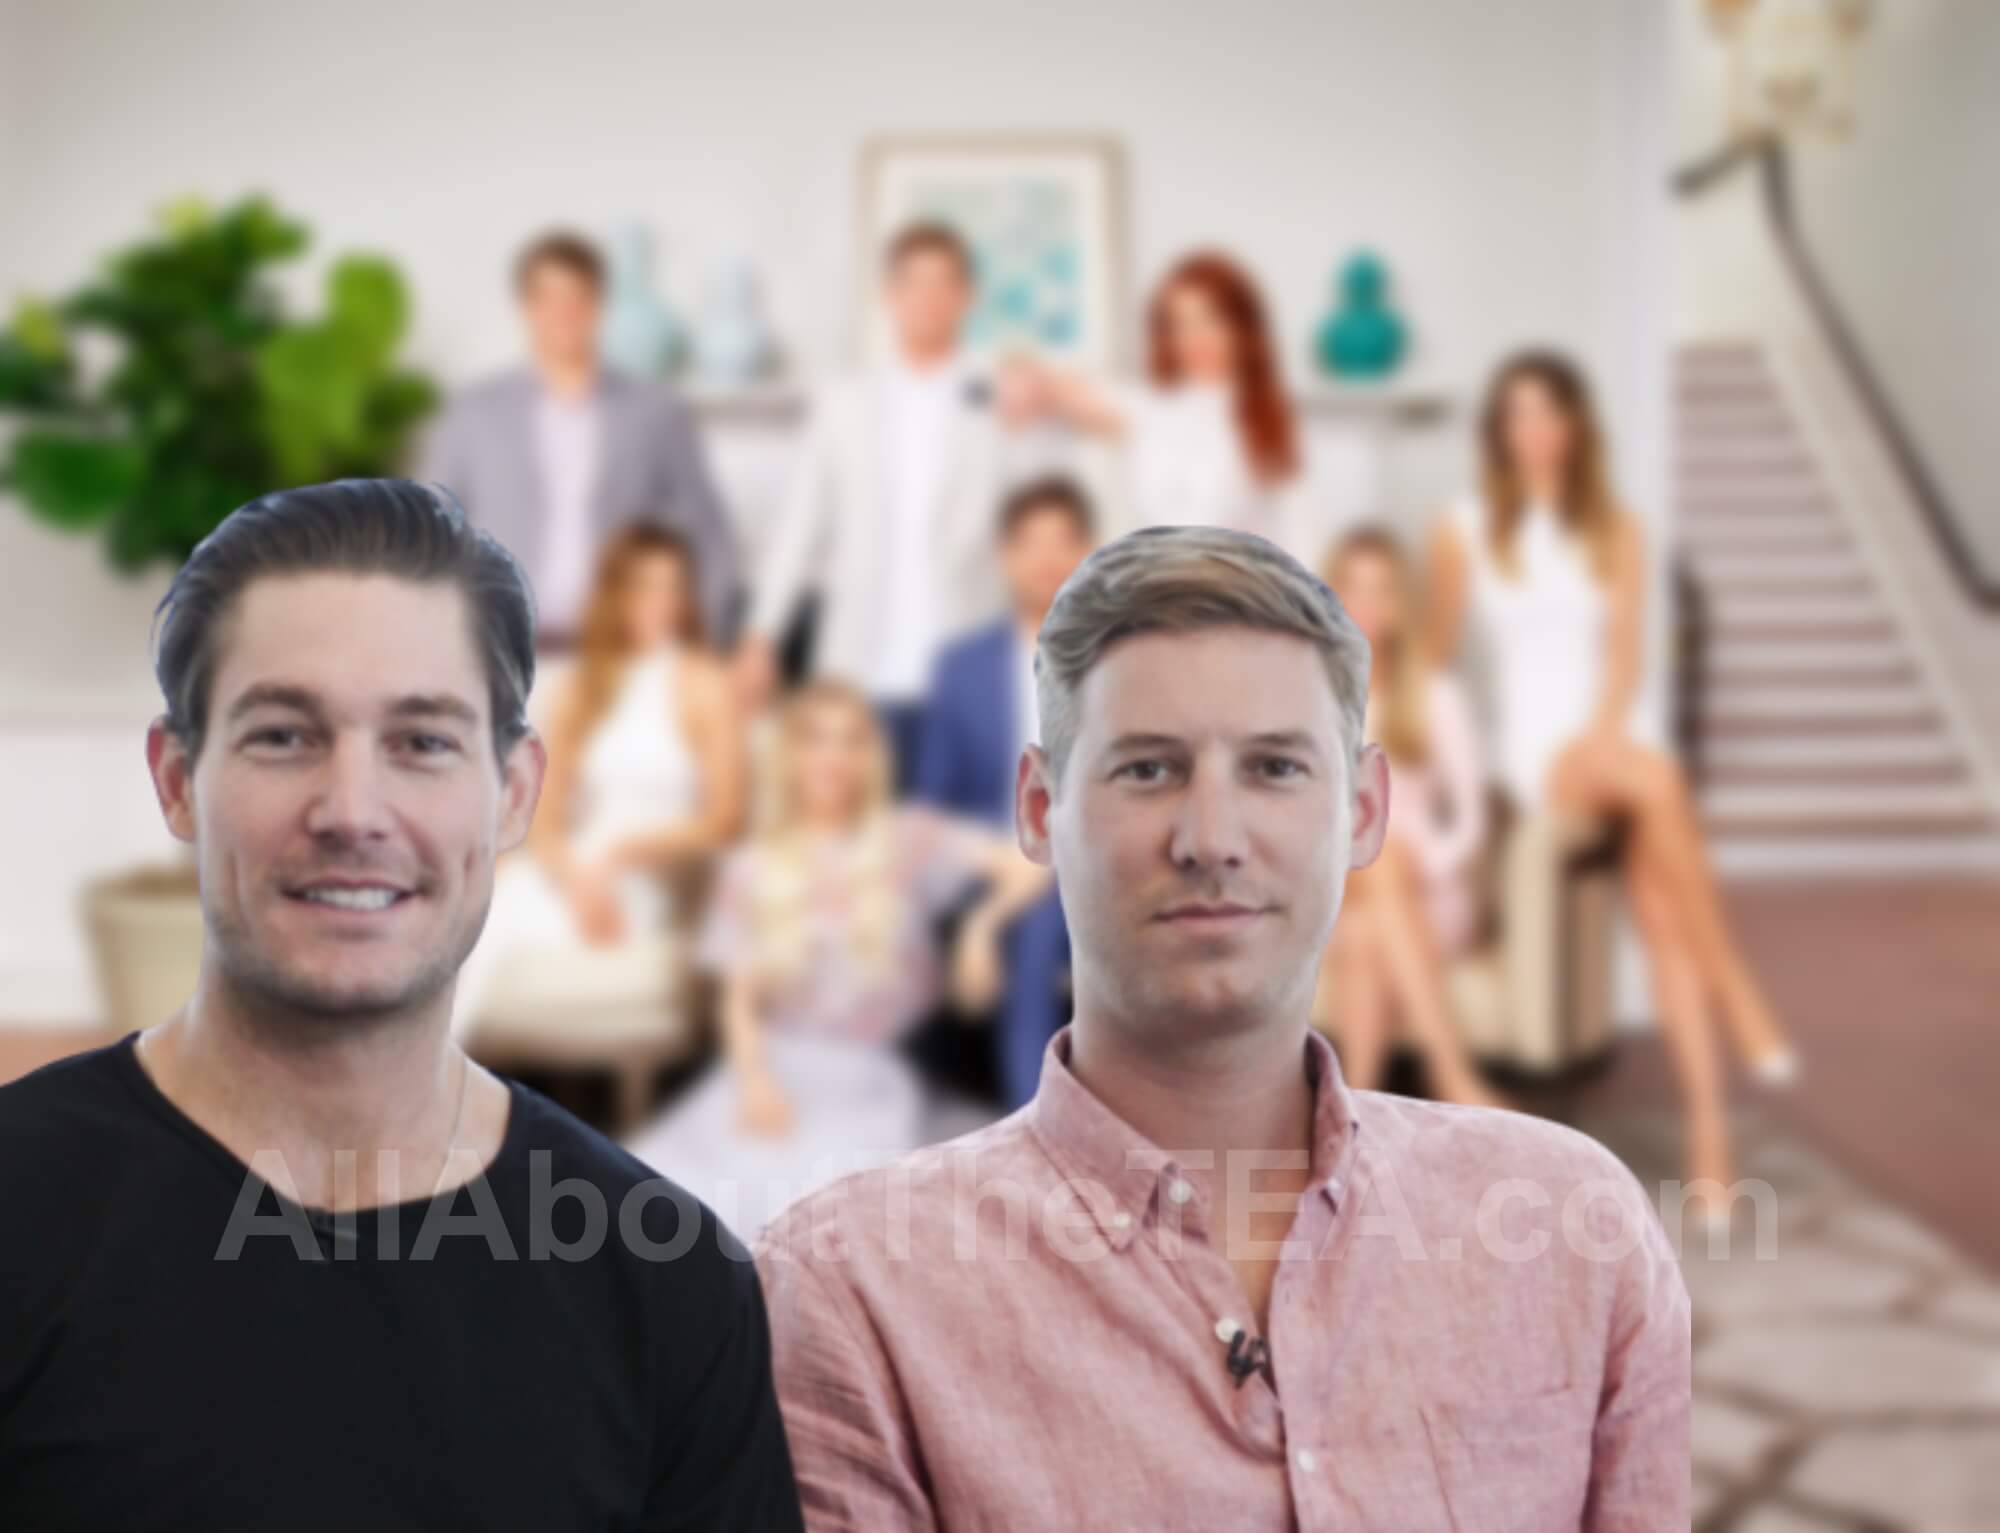 EXCLUSIVE: ‘Southern Charm’ Producers Put Cast Members Health at Risk, Craig and Austen Have Coronavirus + Season 7 Update!